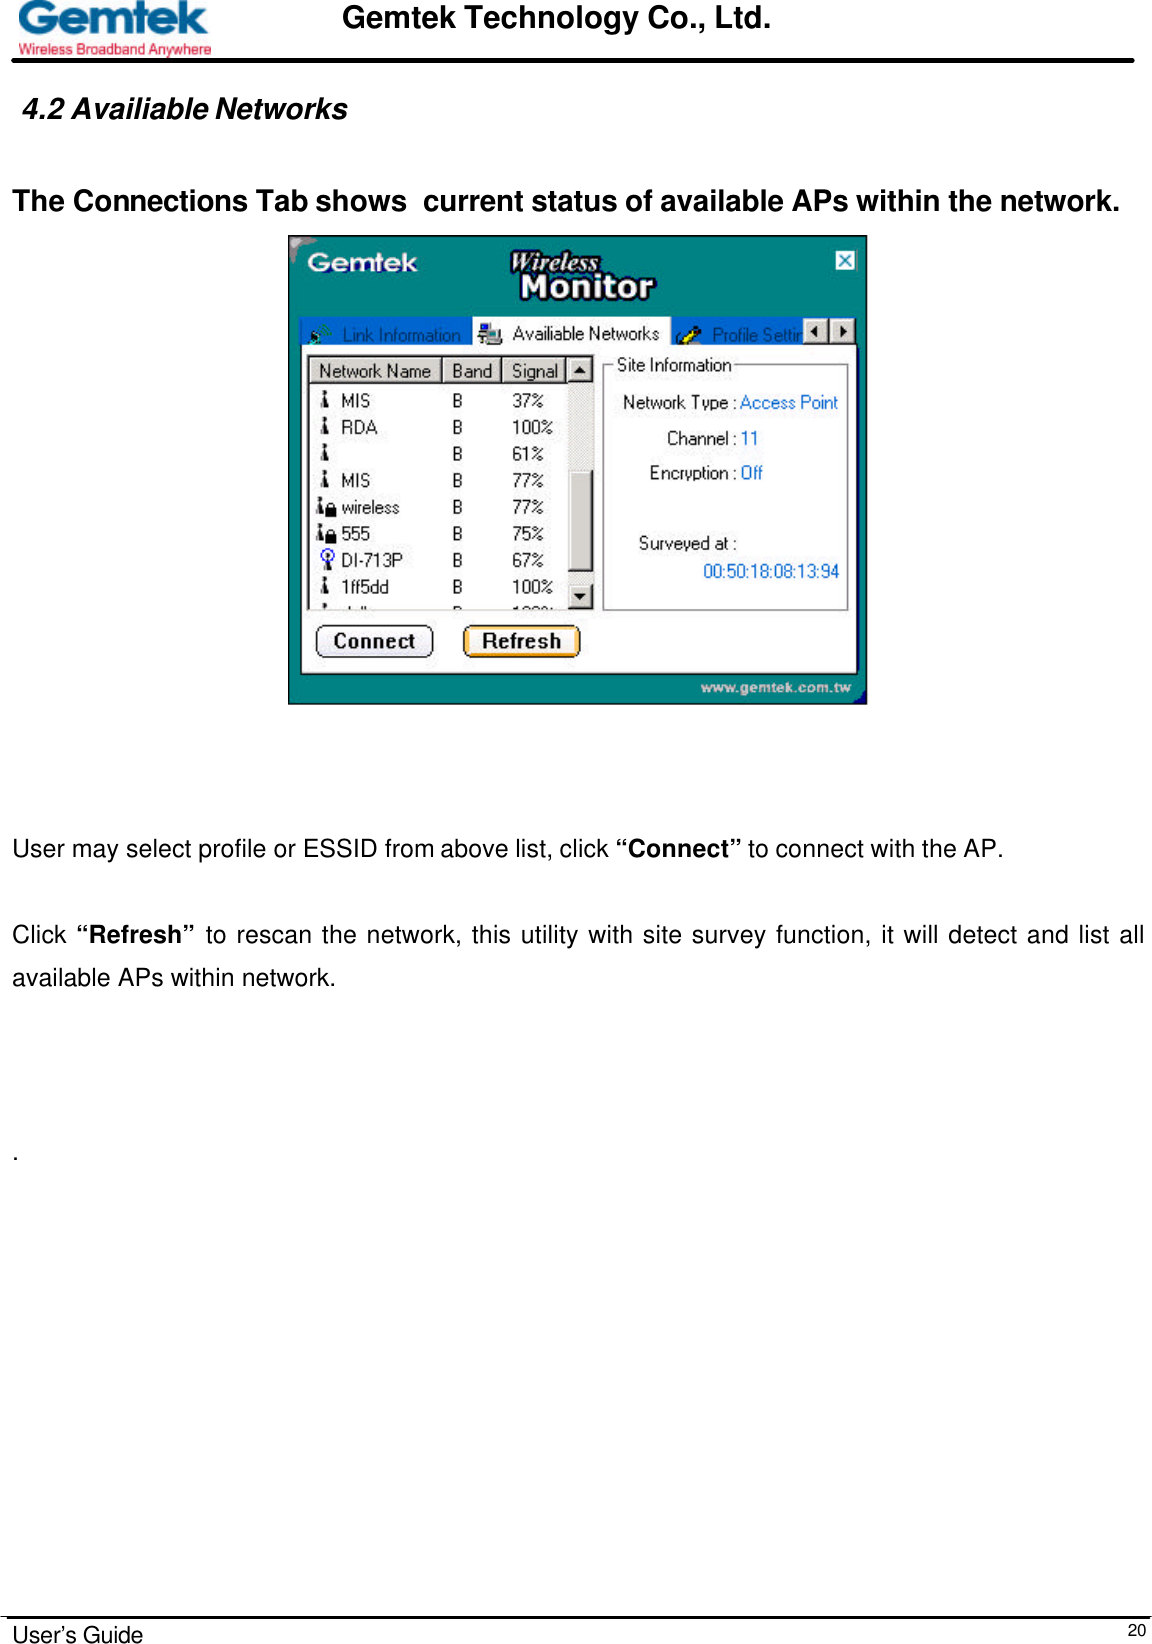                                                                                                                                                                                                                                                                      User’s Guide  20Gemtek Technology Co., Ltd. 4.2 Availiable Networks   The Connections Tab shows  current status of available APs within the network.                                       User may select profile or ESSID from above list, click “Connect” to connect with the AP.  Click “Refresh” to rescan the network, this utility with site survey function, it will detect and list all available APs within network.     .                         